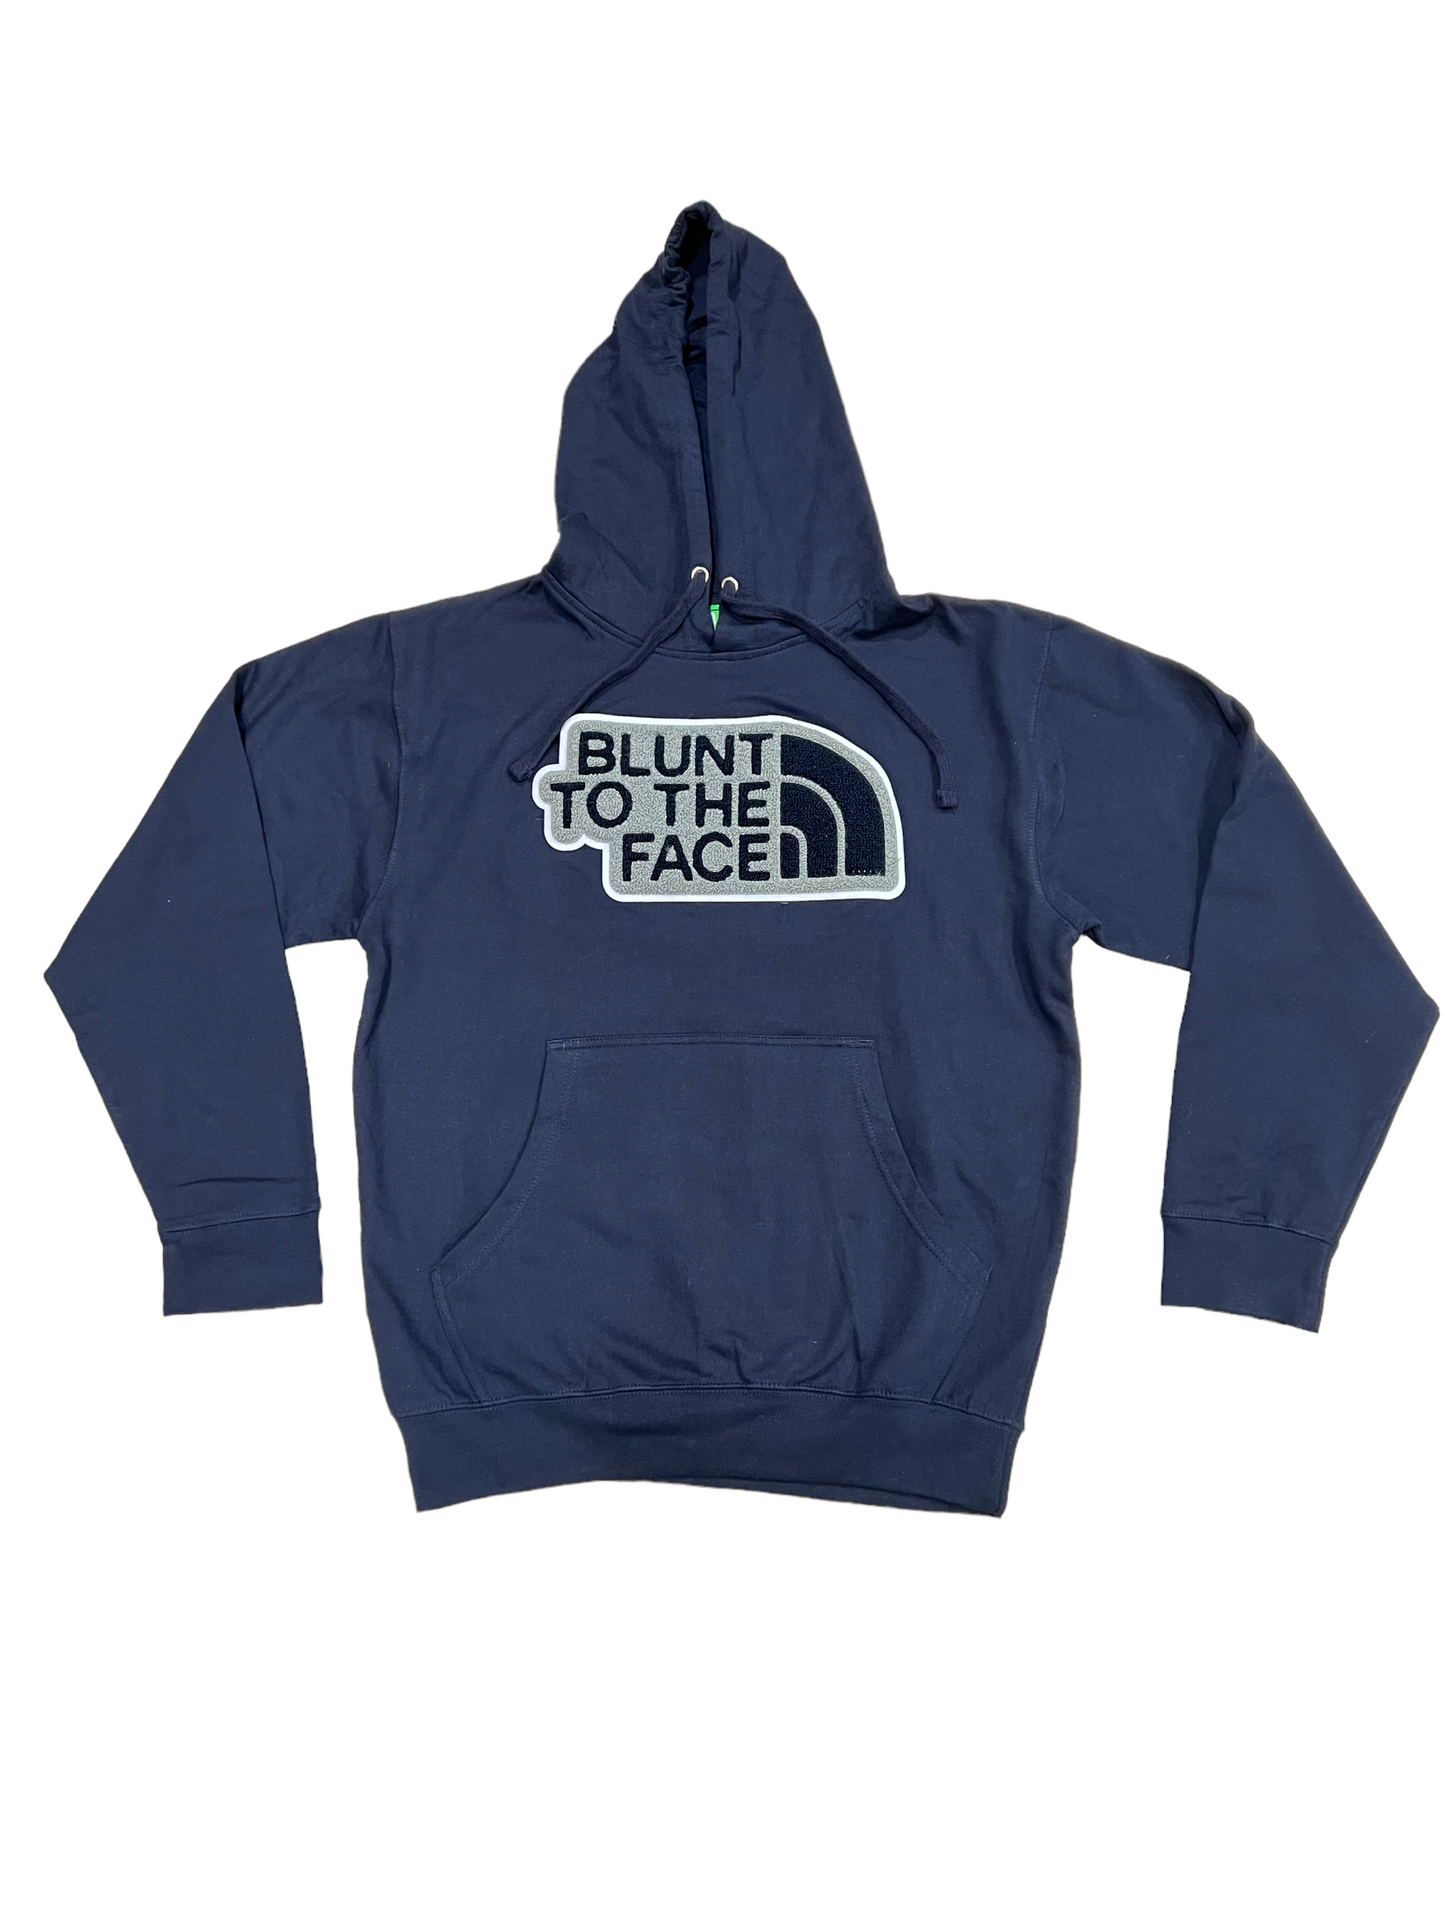 Blunt to the face chenille hoodie